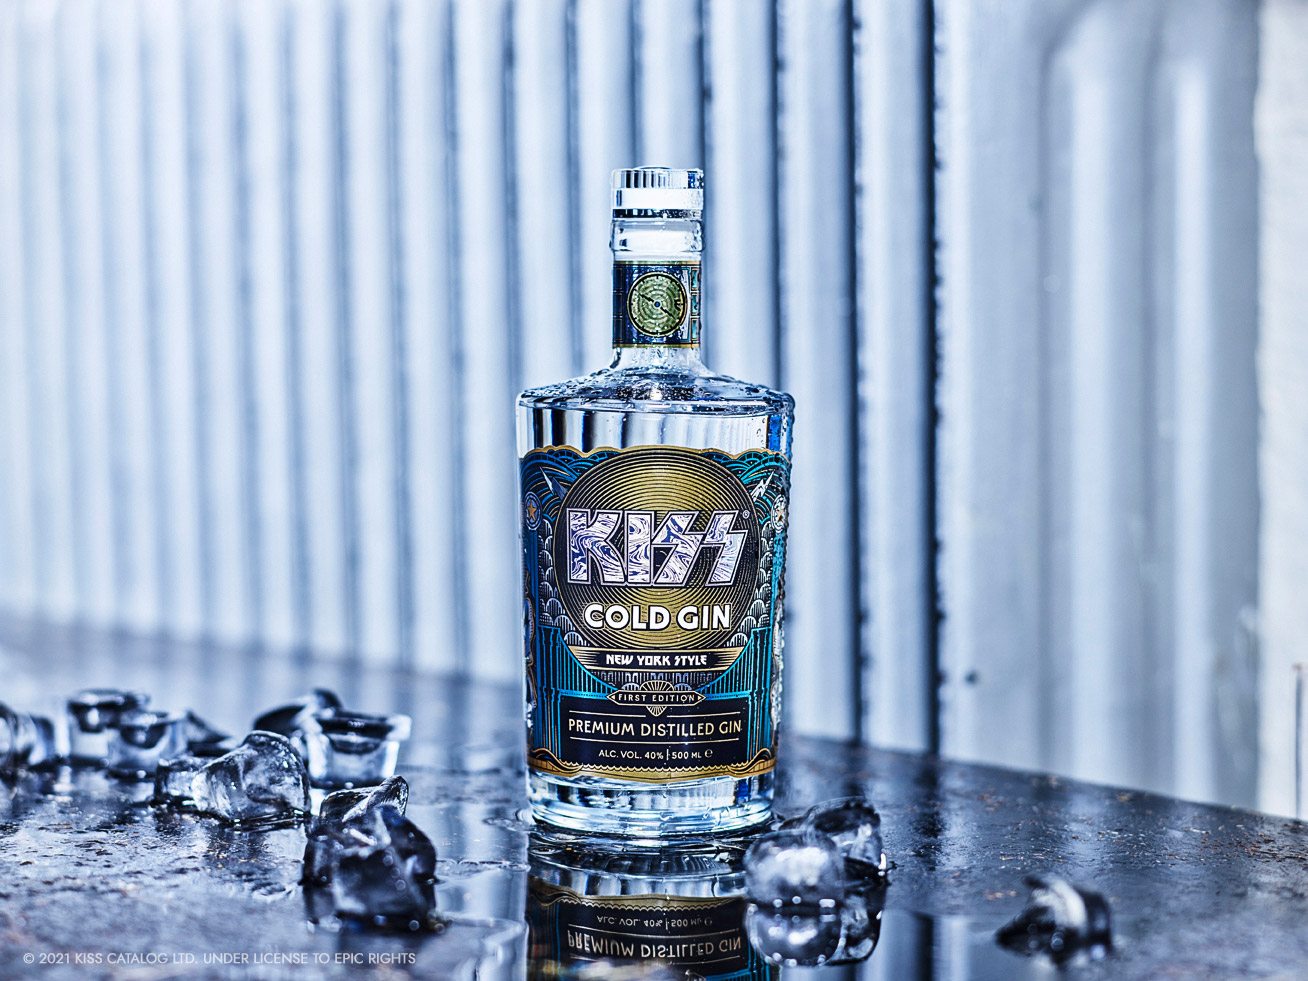 Kiss launches Cold Gin, a new product named after their 1974 song written by former member Ace Frehley